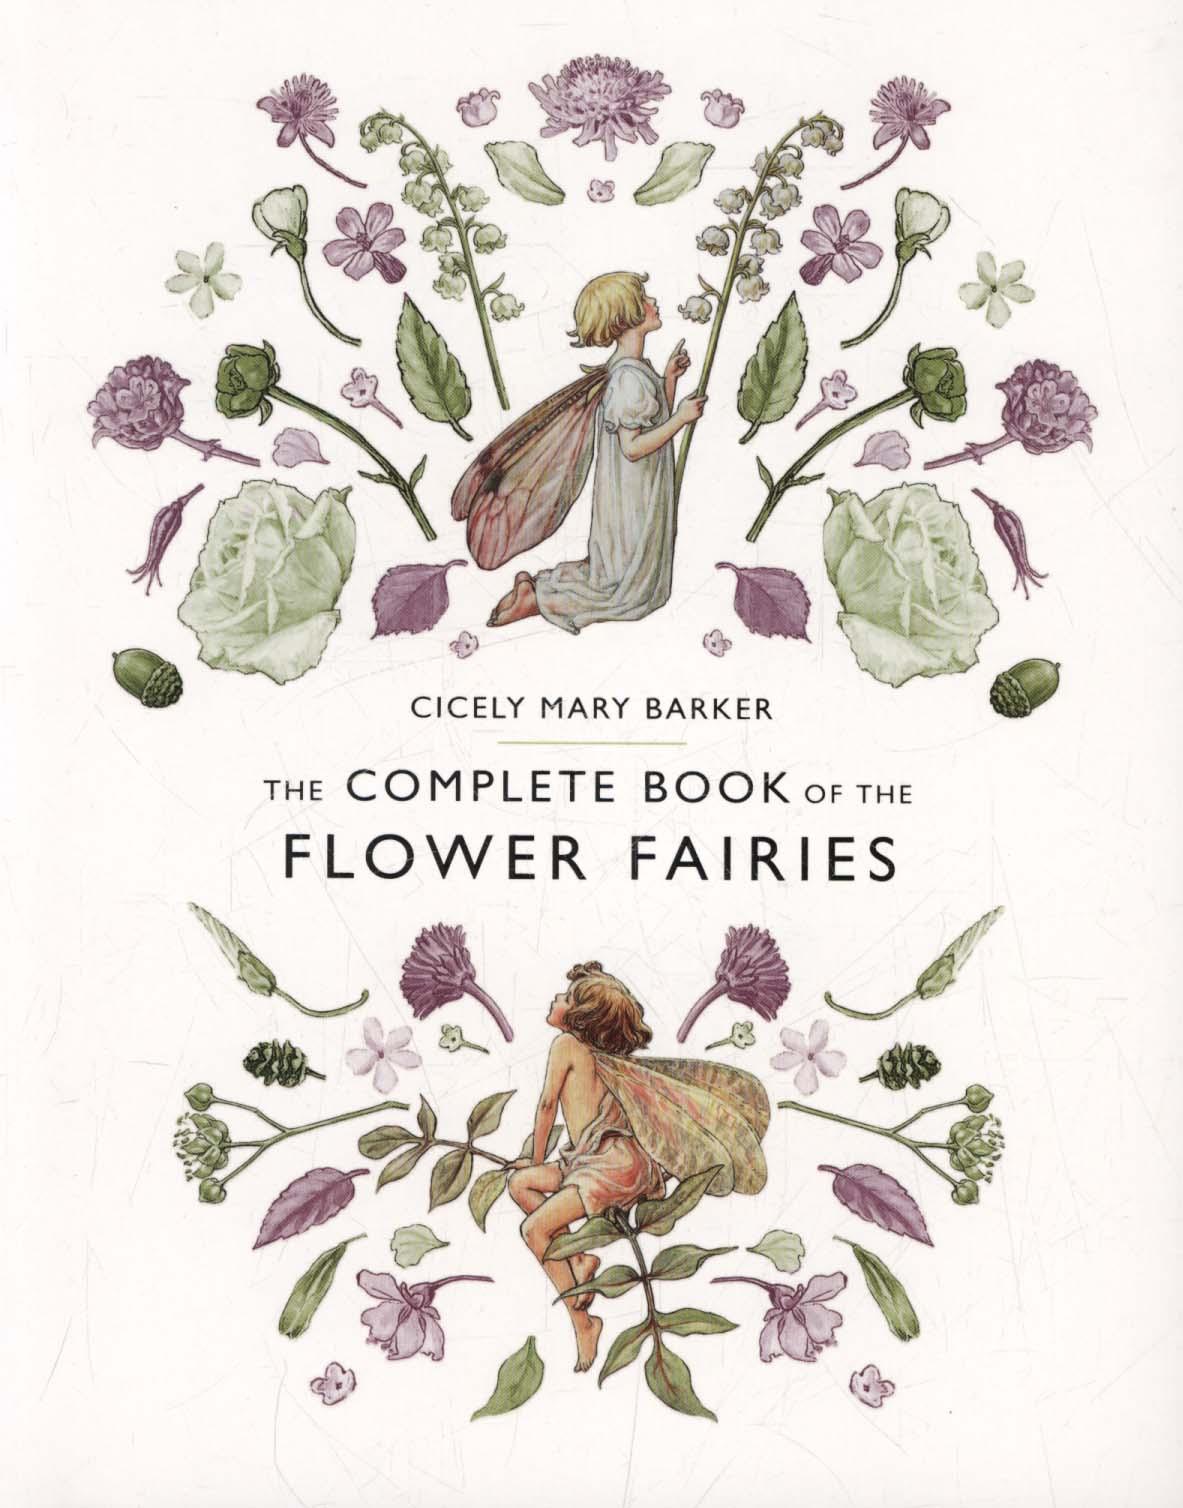 Complete Book of the Flower Fairies - Cicely Mary Barker